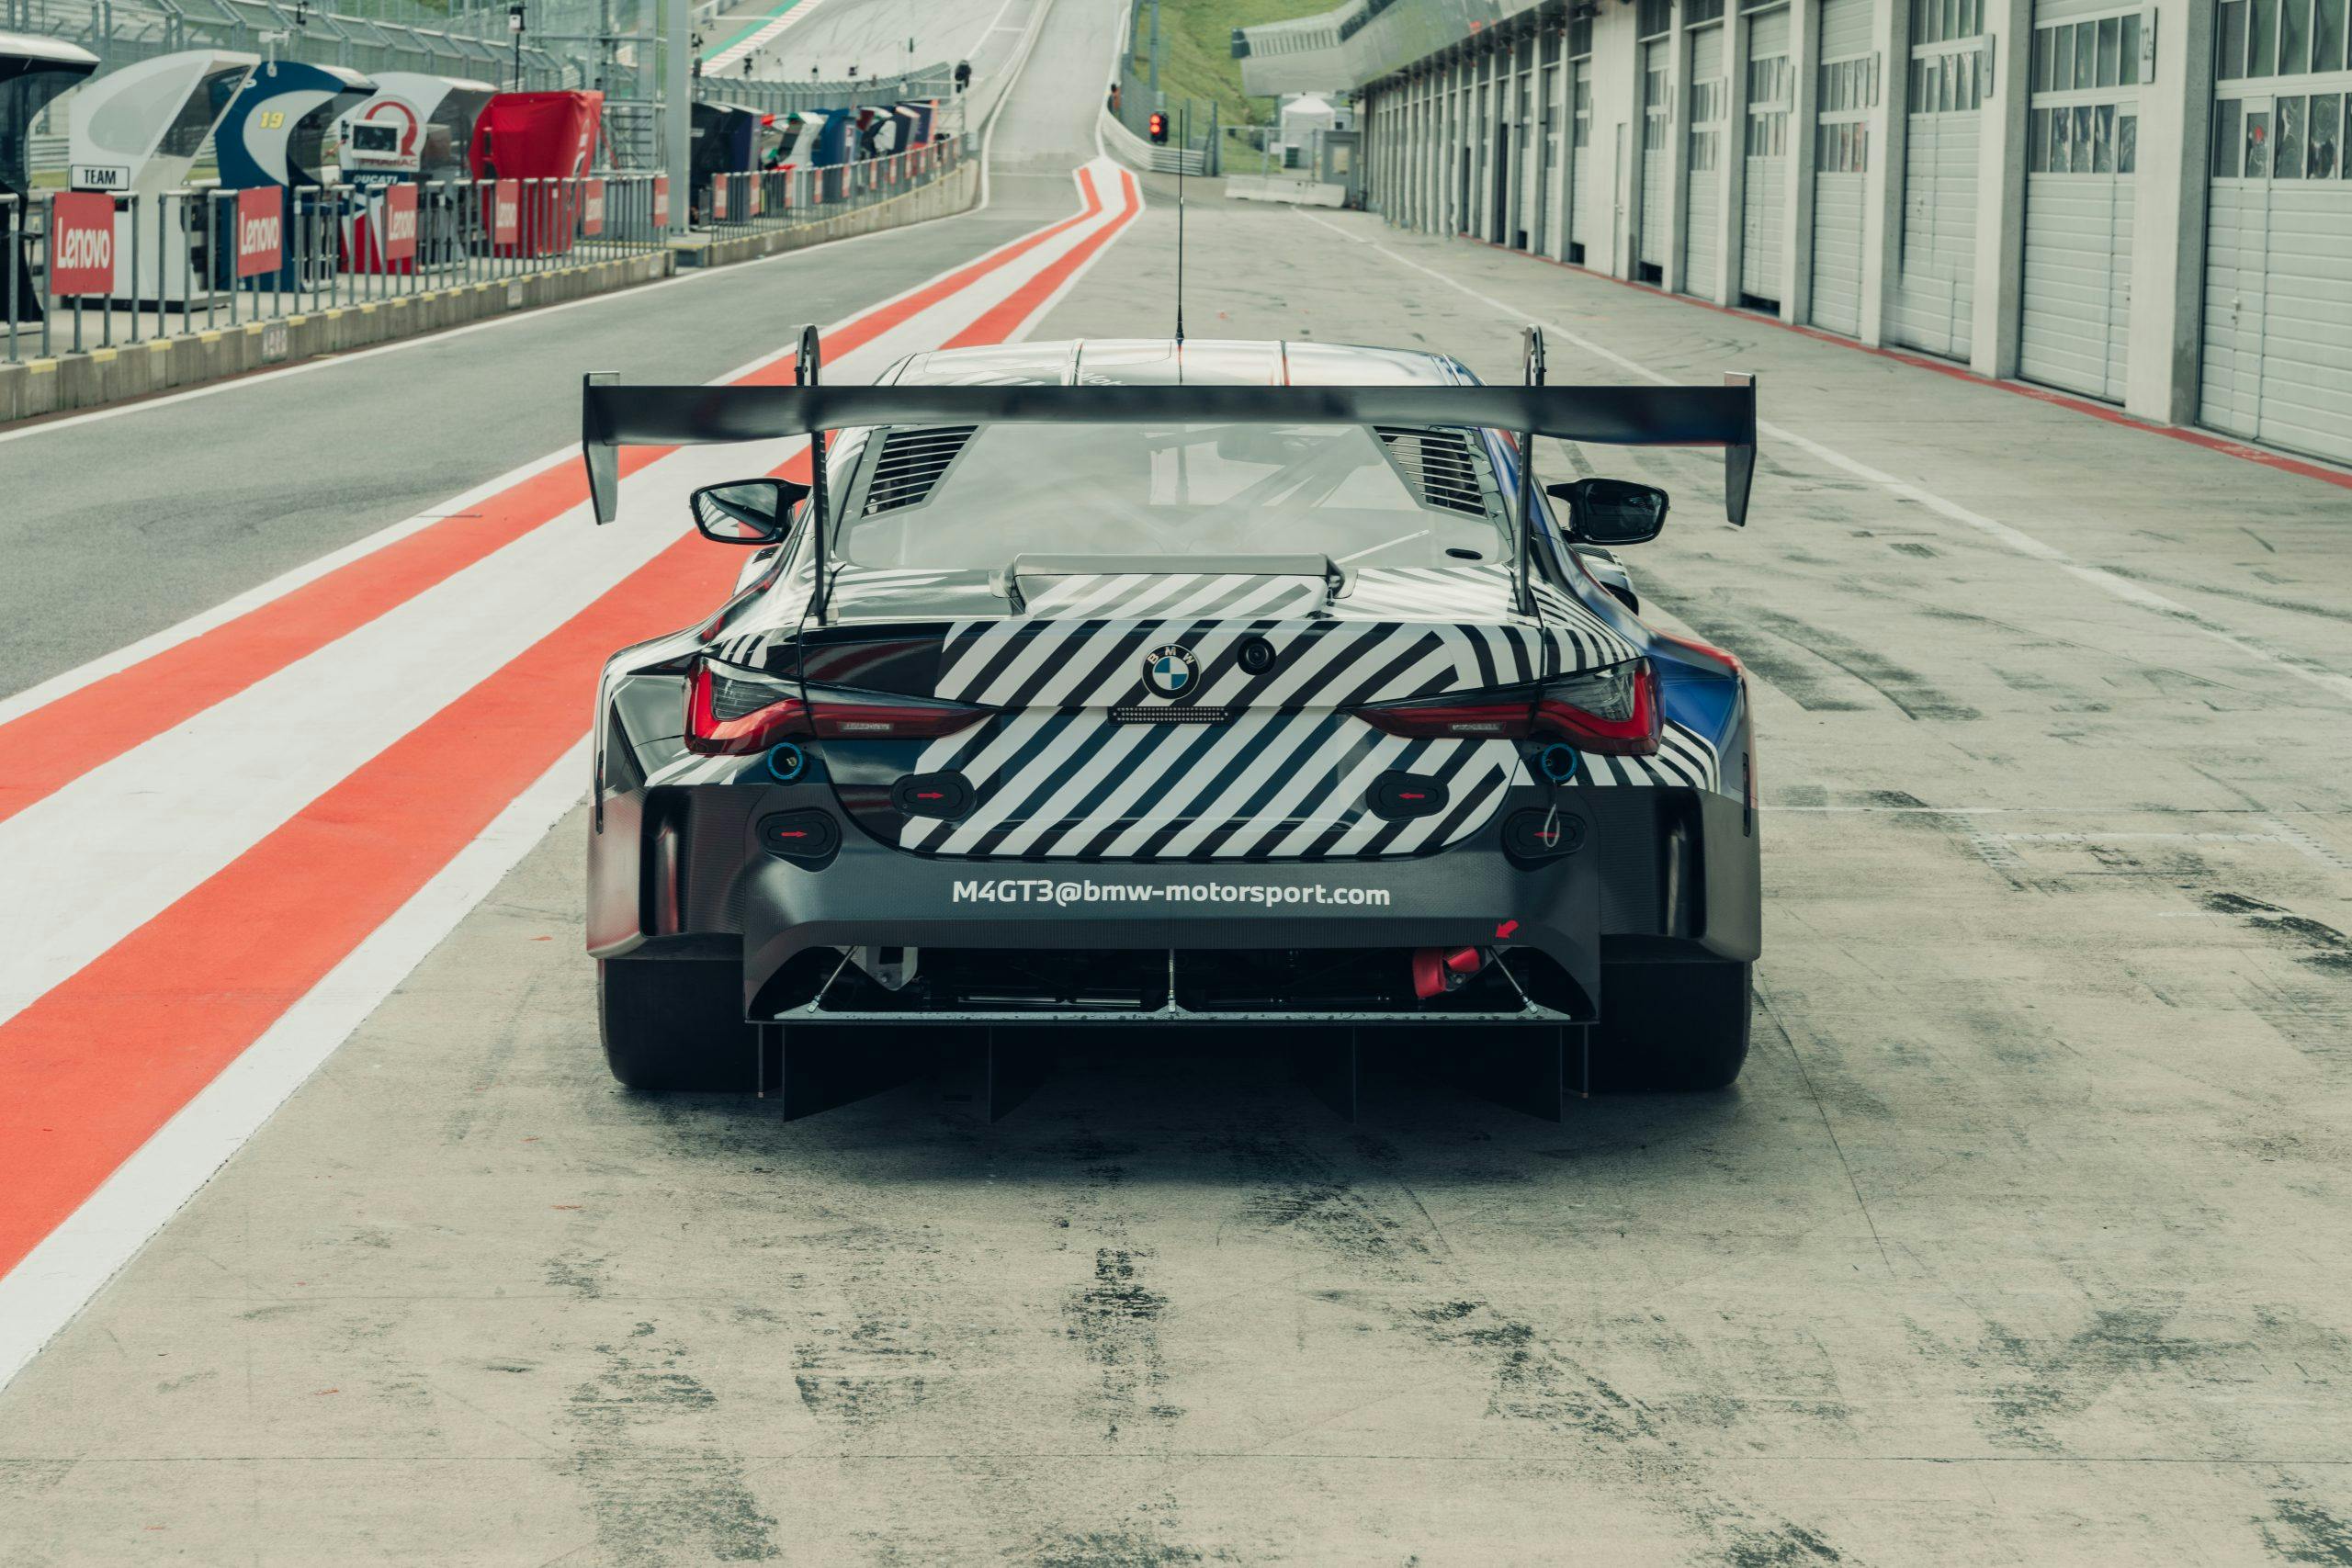 2021 BMW M4 GT3 prototype rear wing Red Bull Ring August 2020